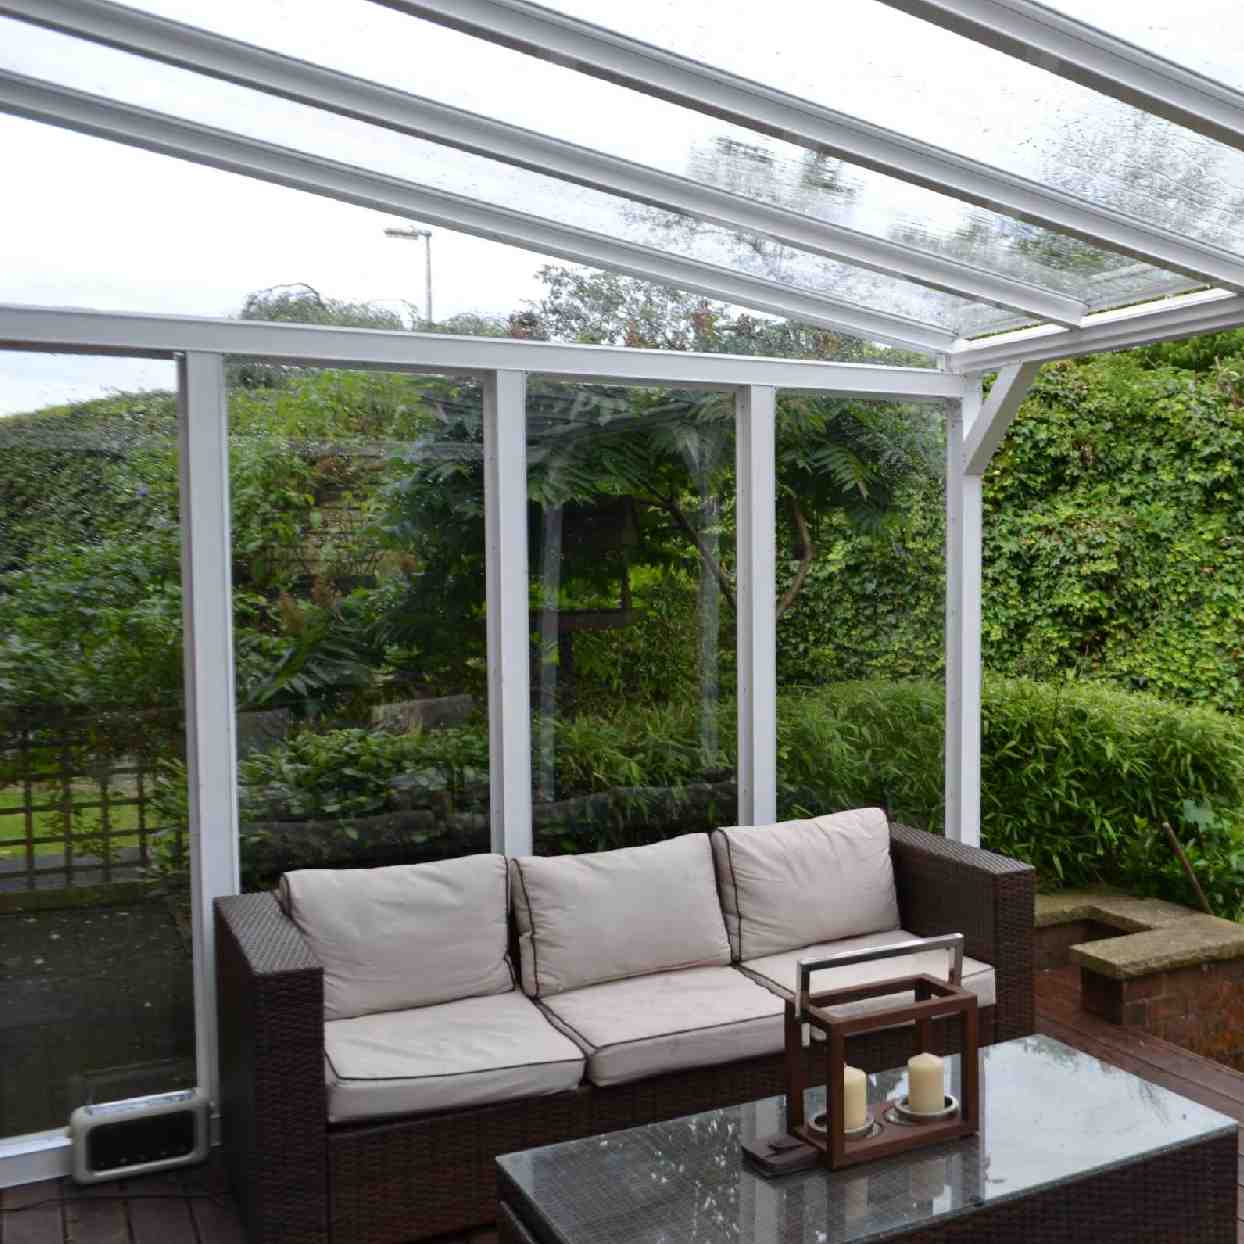 Buy Omega Verandah White with 6mm Glass Clear Plate Polycarbonate Glazing - 3.5m (W) x 3.0m (P), (3) Supporting Posts online today